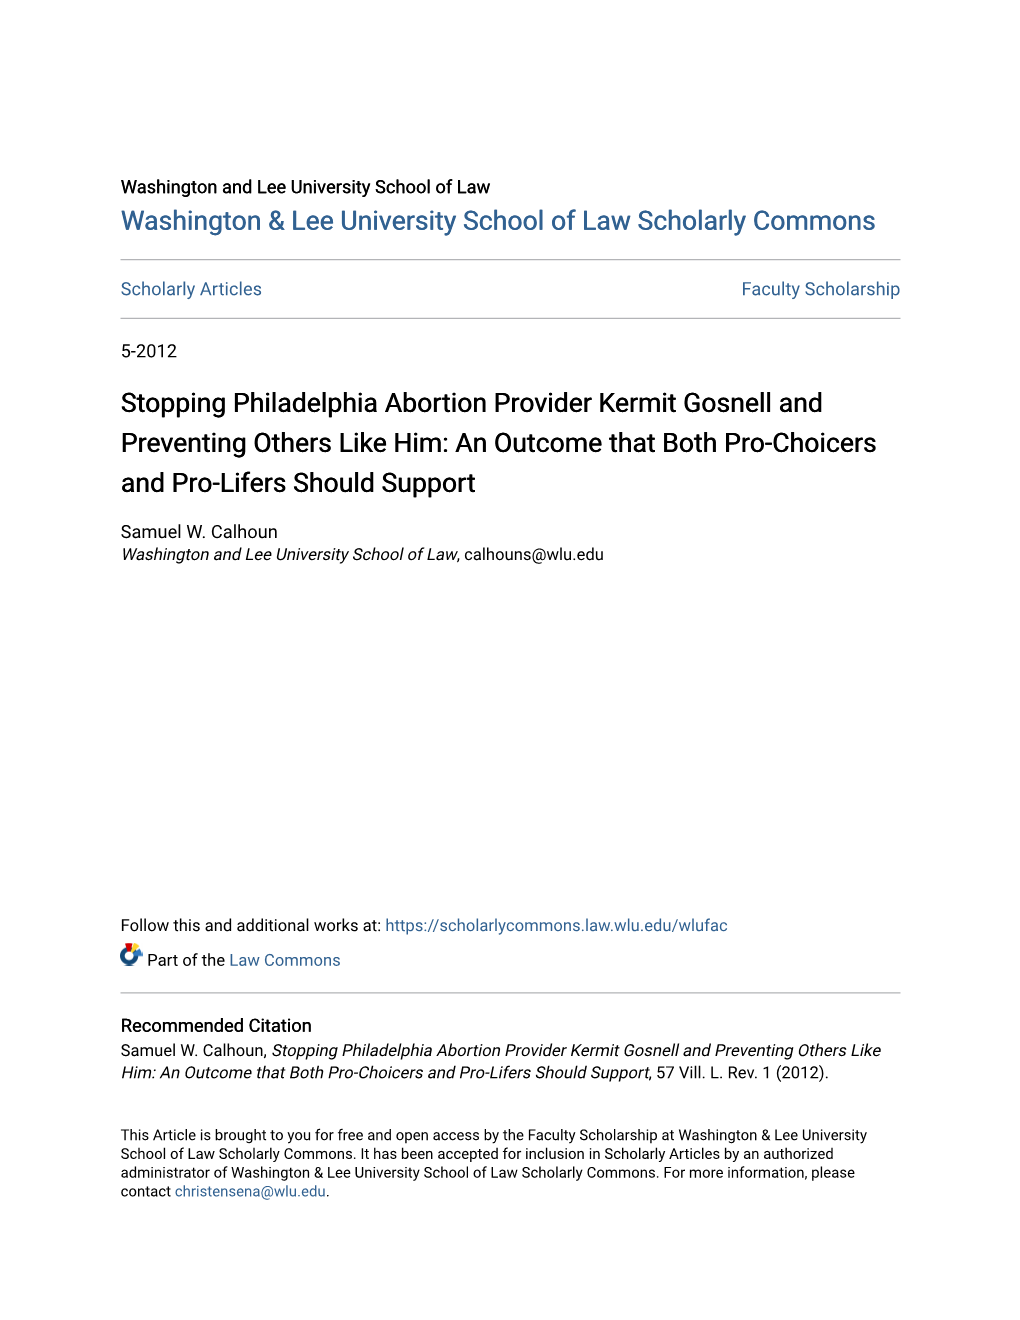 Stopping Philadelphia Abortion Provider Kermit Gosnell and Preventing Others Like Him: an Outcome That Both Pro-Choicers and Pro-Lifers Should Support